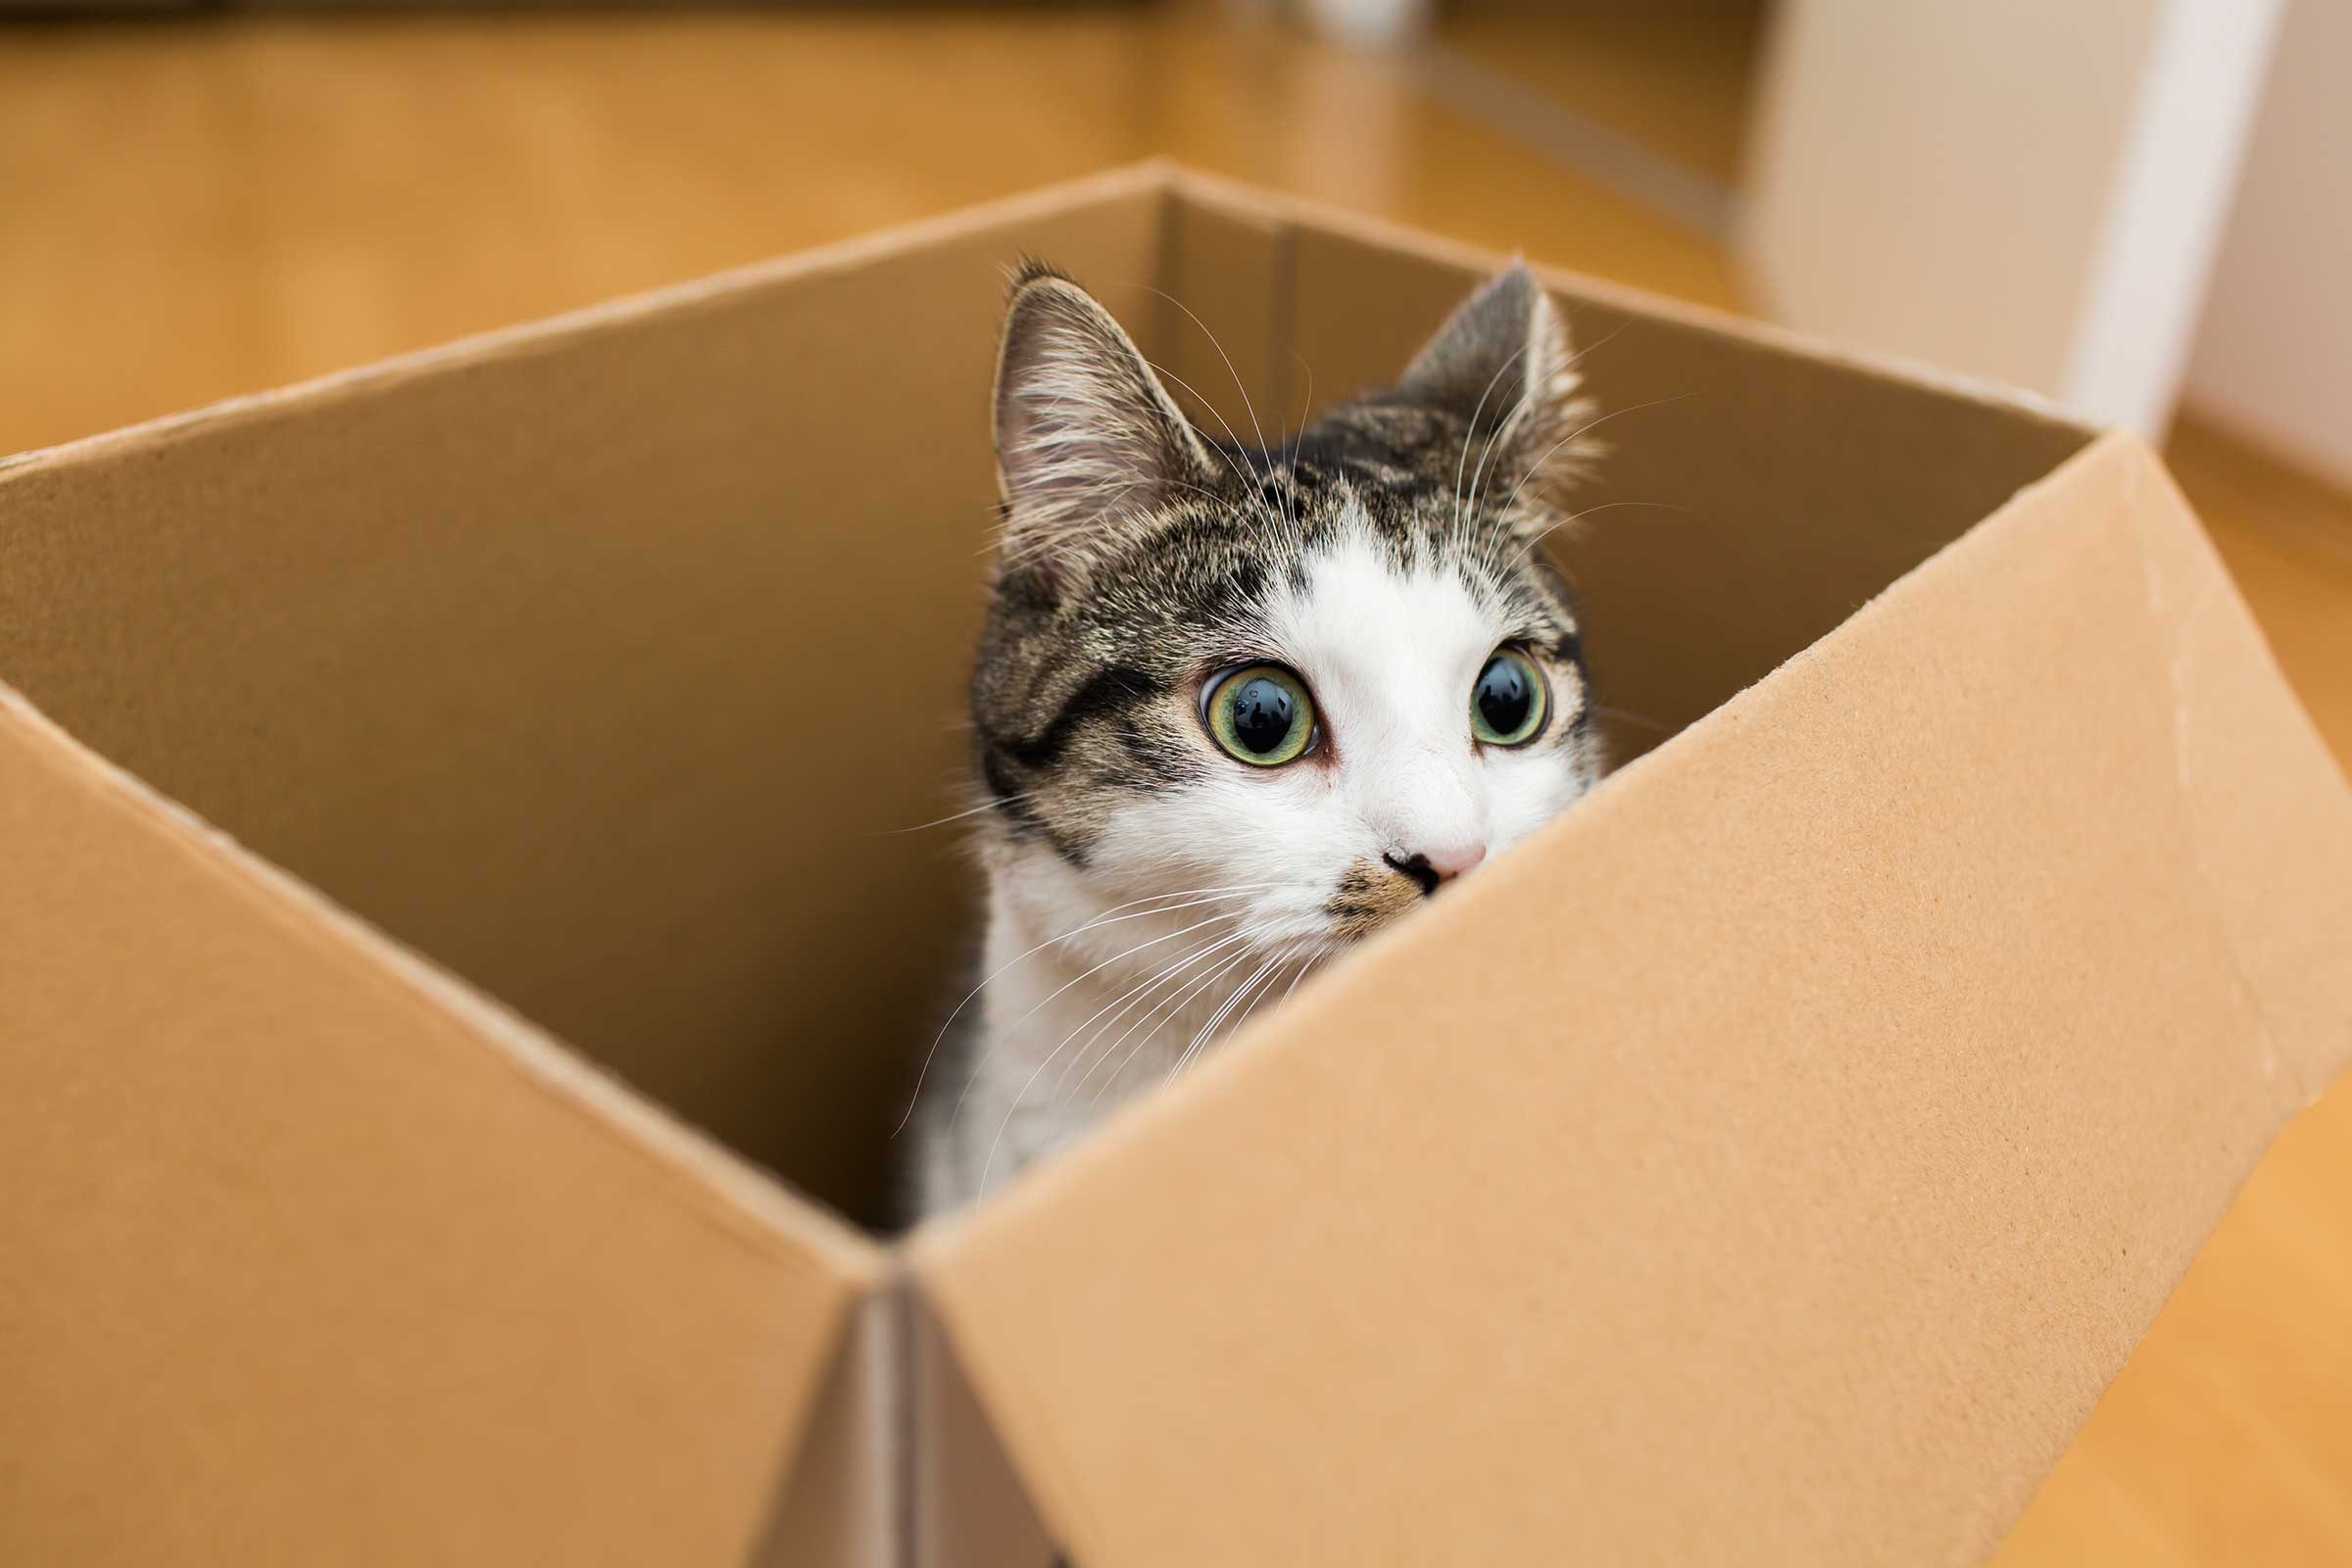 Why Do Cats Love Boxes? Experts Explain Why Cats Sit in Boxes